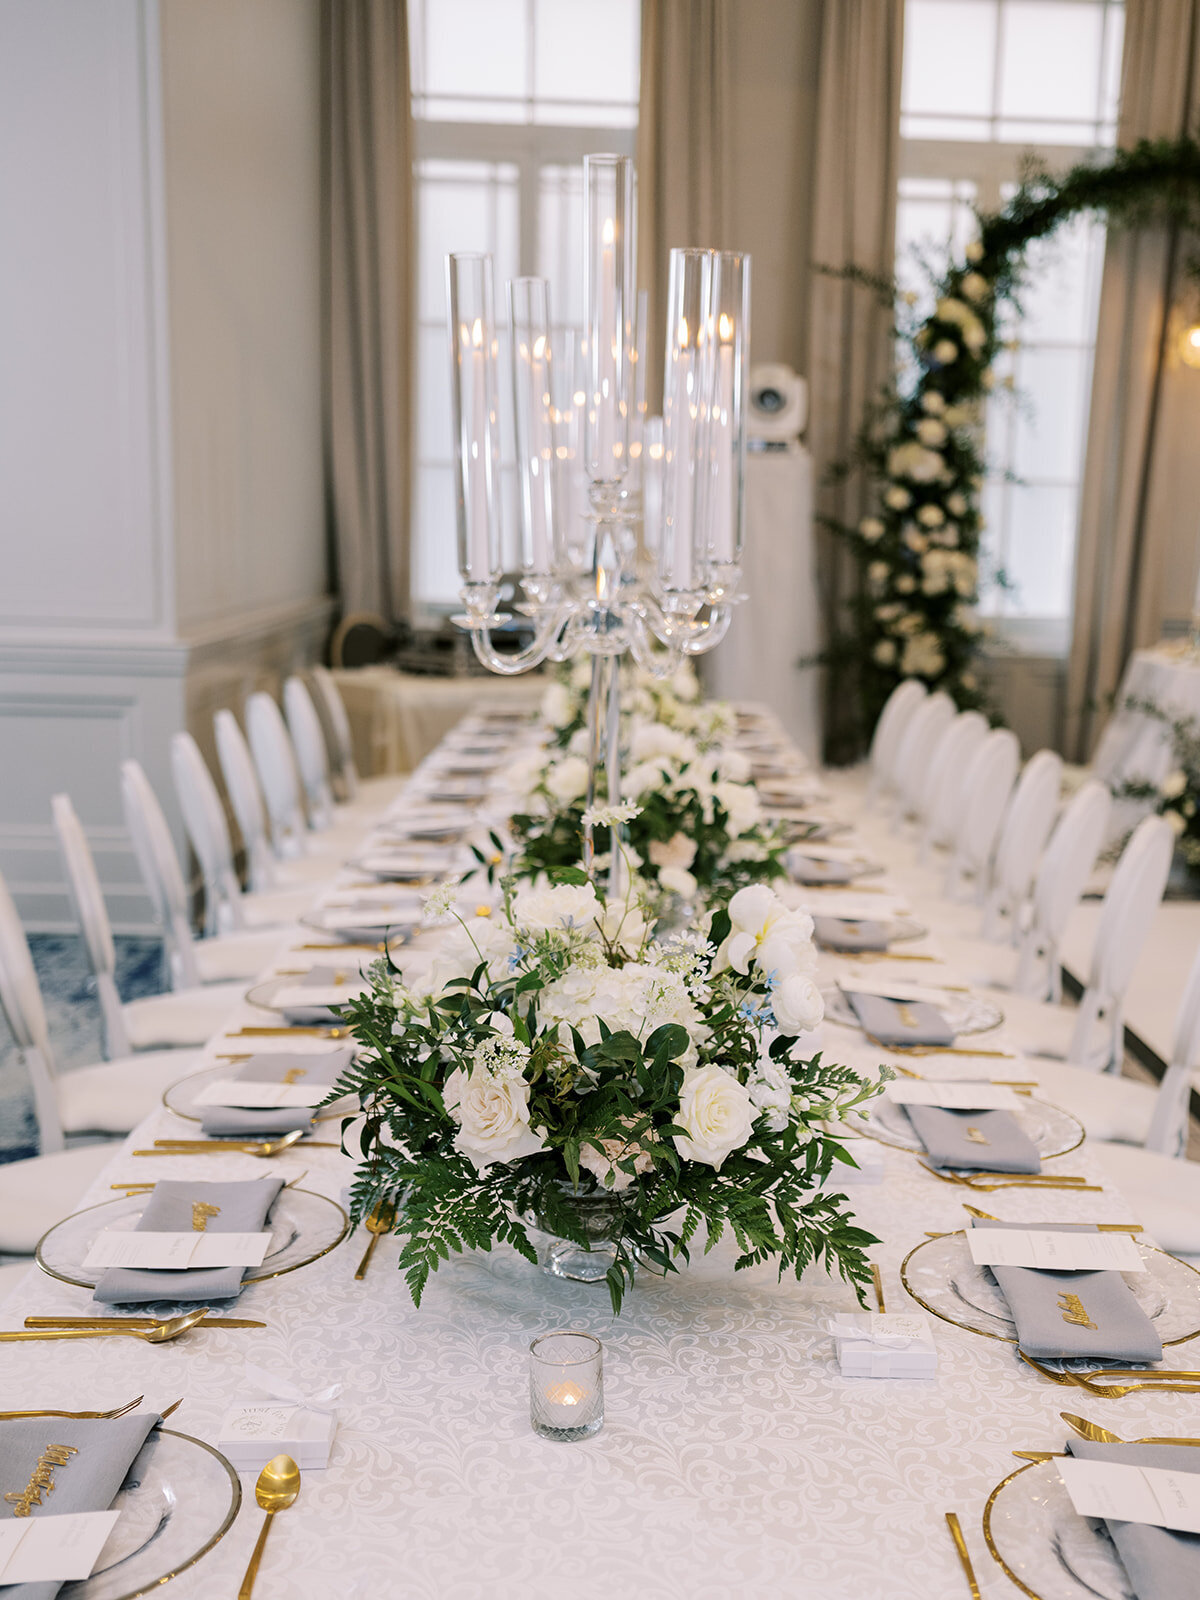 A long dining table is elegantly set with white floral centerpieces, candles, and neatly arranged place settings, each with a folded grey napkin and gold utensils. A candelabra stands in the center. This enchanting setup showcases the skill of a top wedding planner in Calgary.